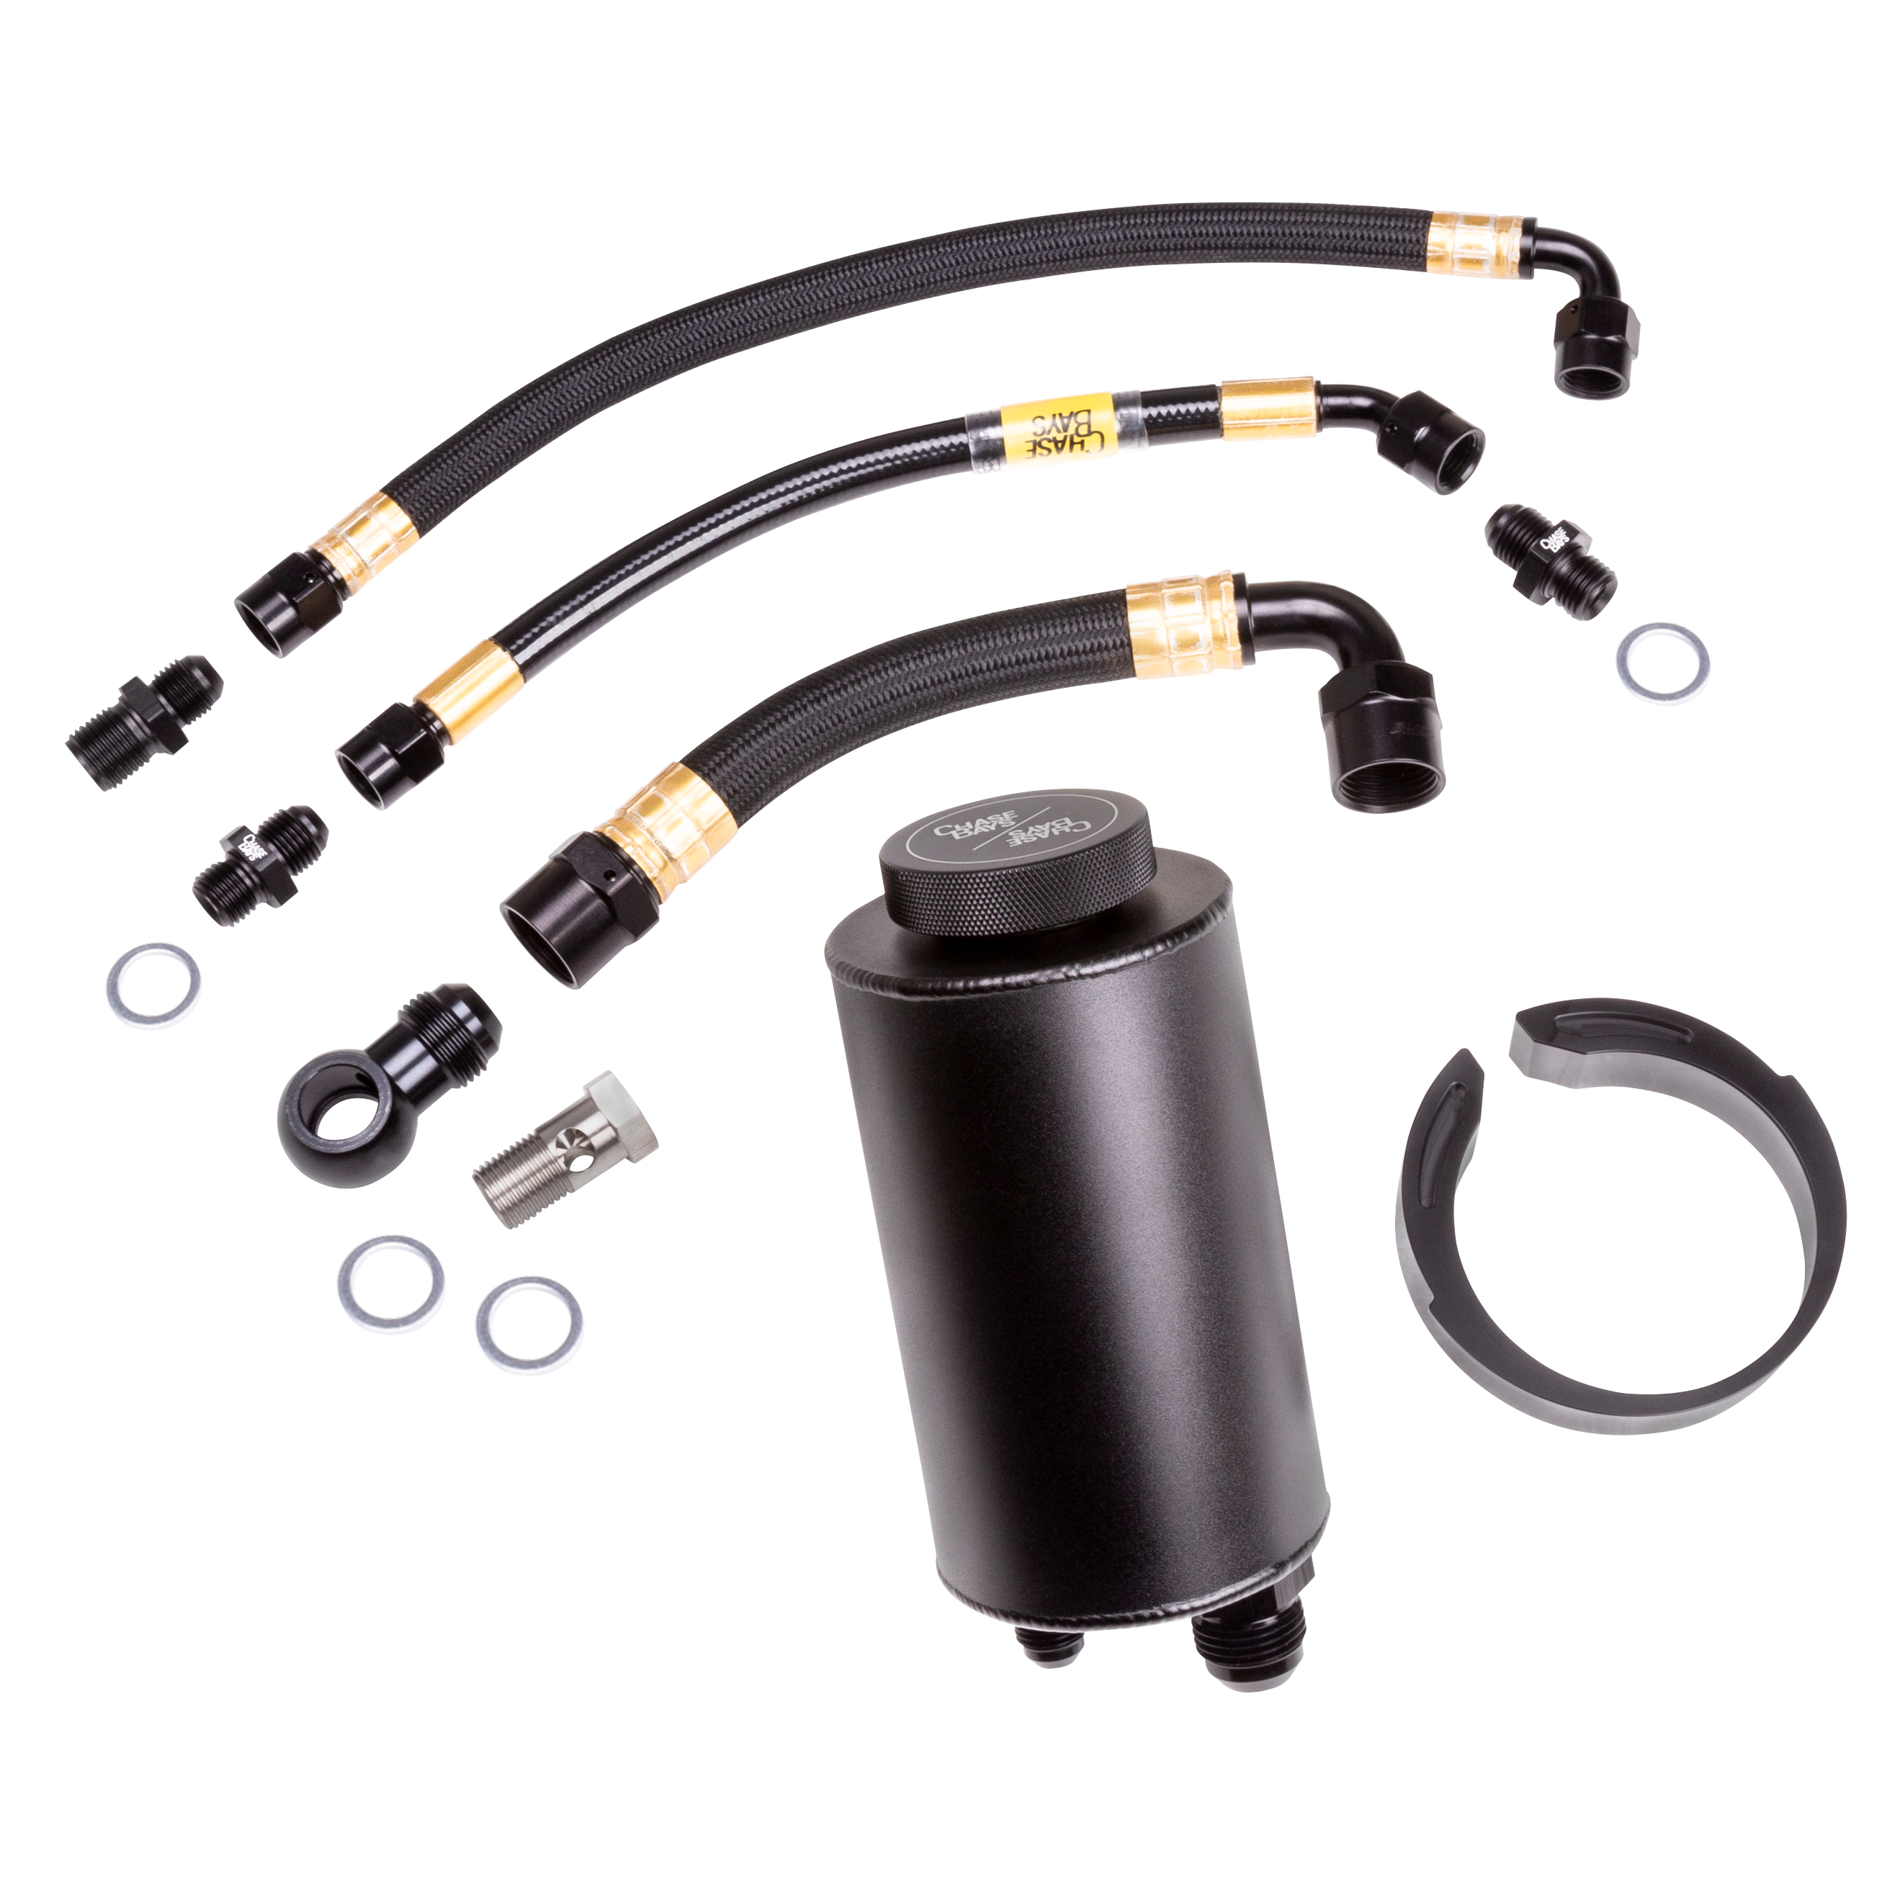 Chase Bays - Power Steering Kit - BMW E36 w/ S50 | S52 | M50 (CB-E36-S50PSK) Yes!